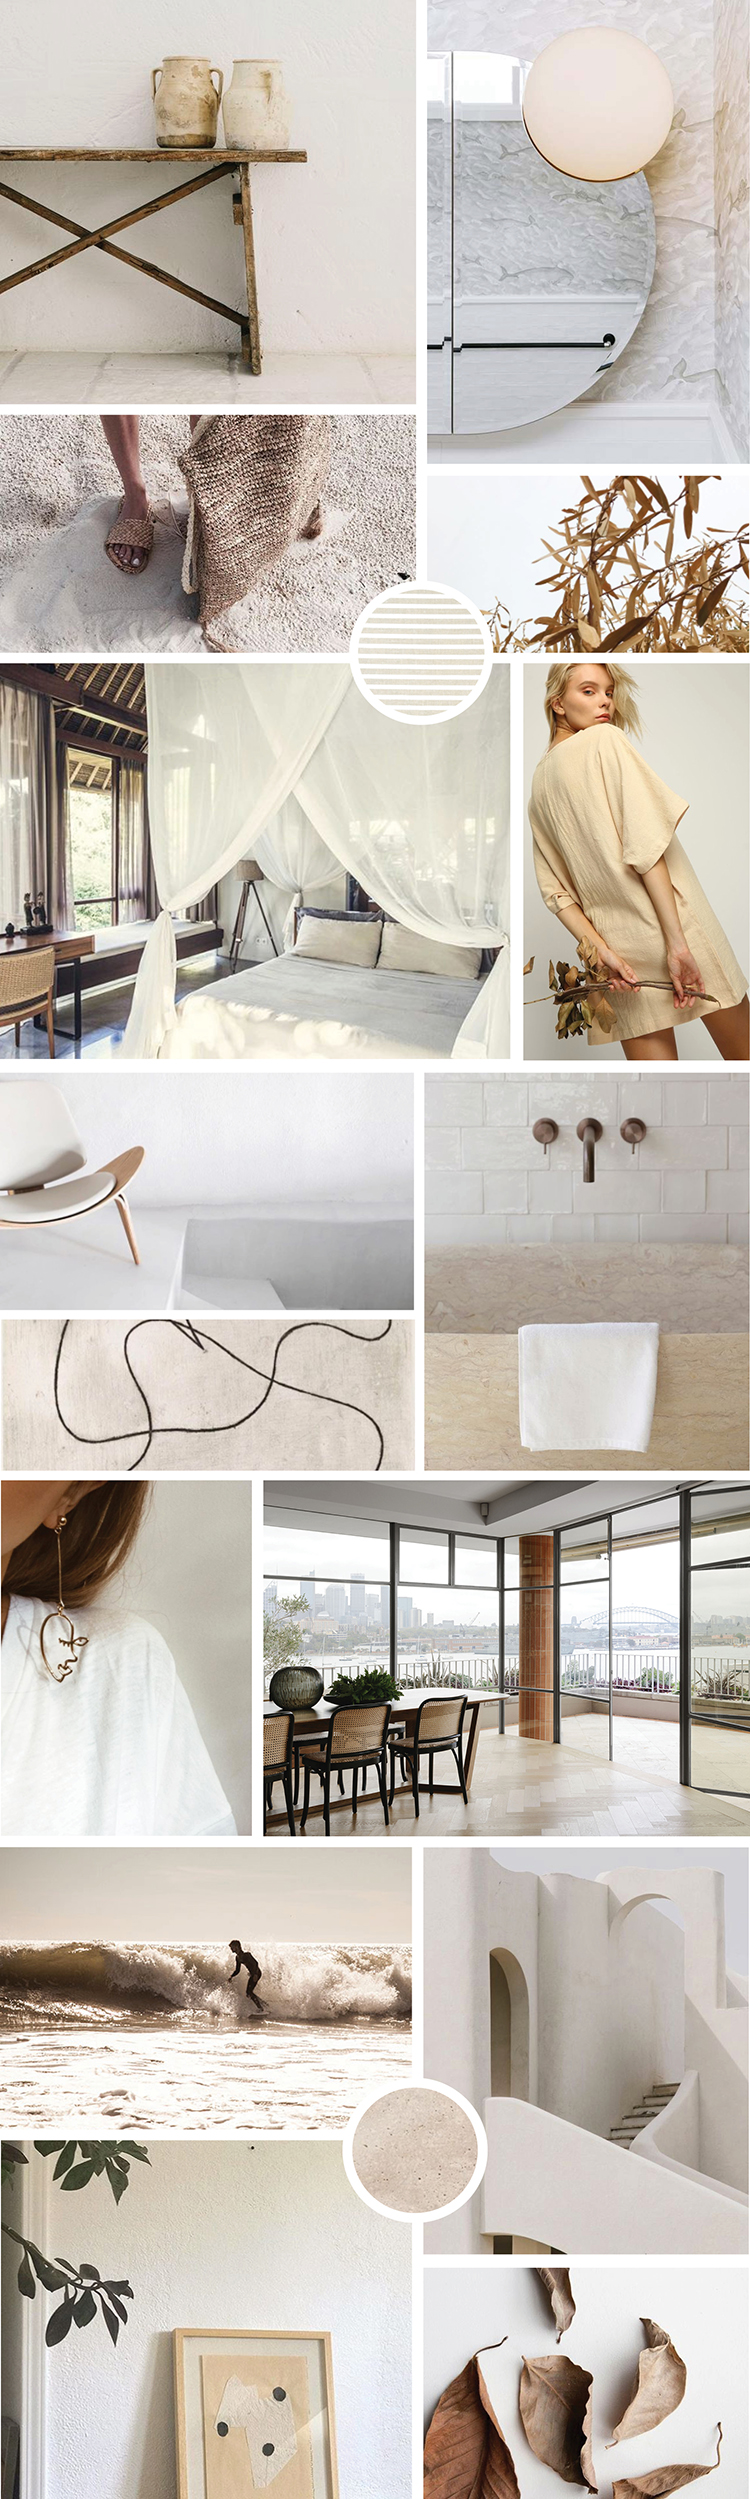 In/Out: Sepia&SandPalette